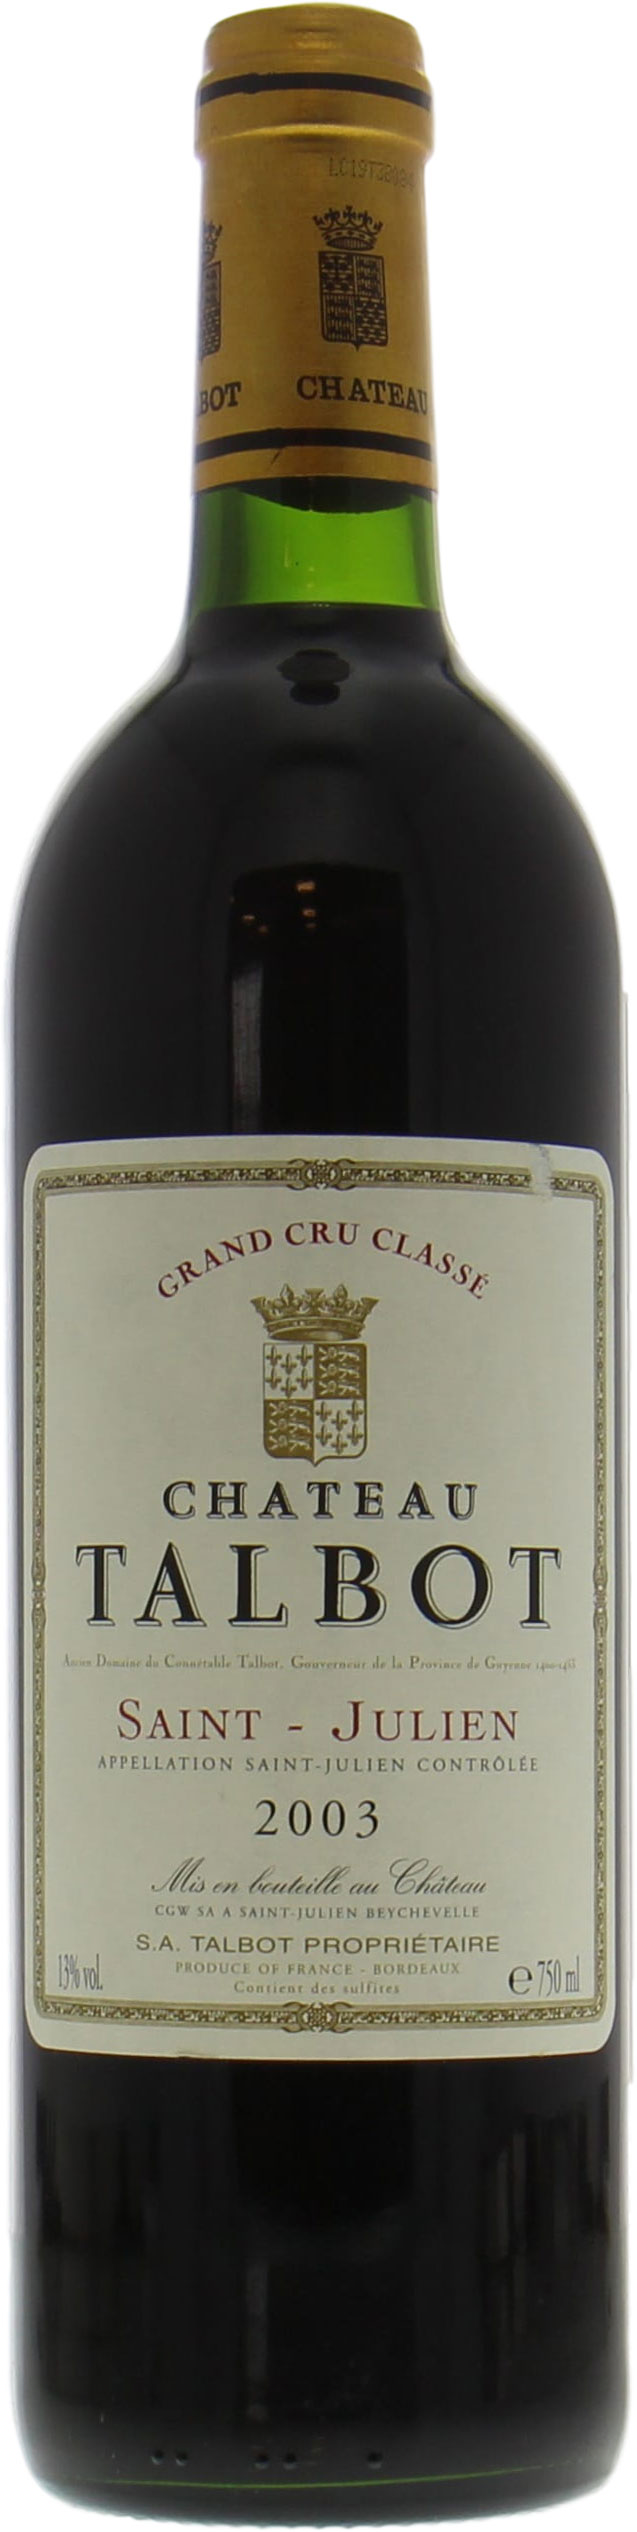 Chateau Talbot - Chateau Talbot 2003 From Original Wooden Case